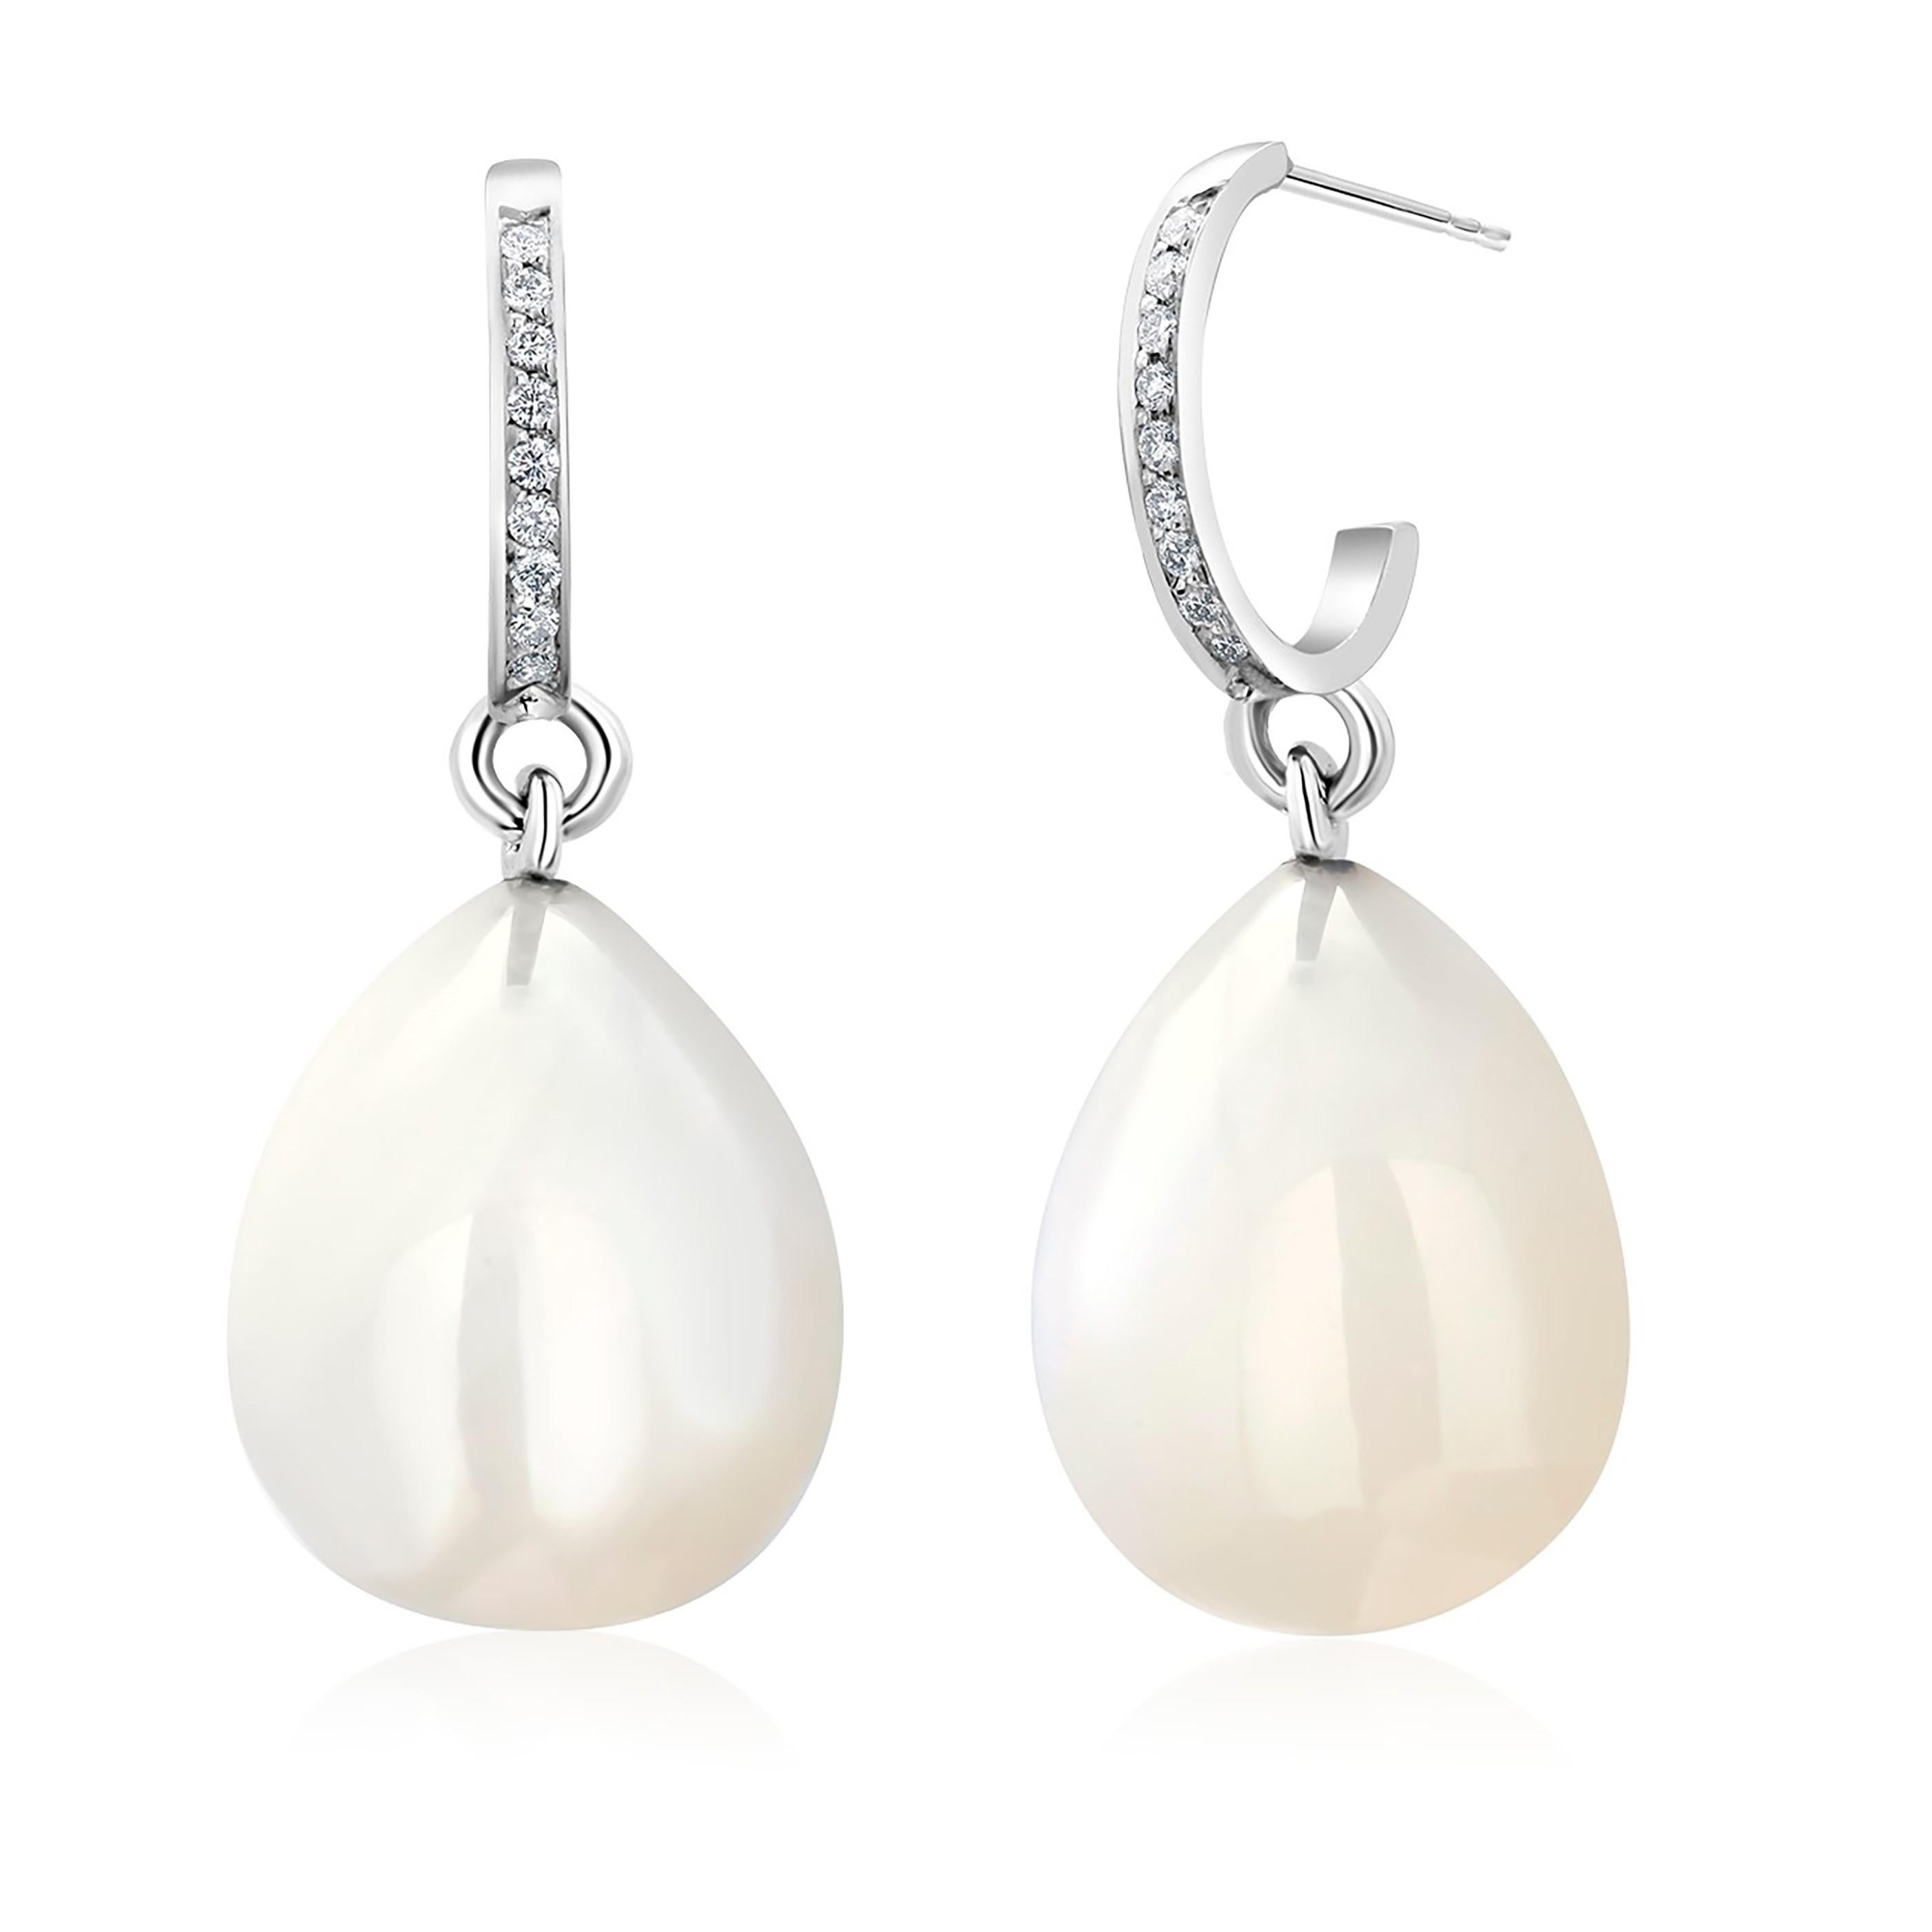 White Moonstone Drops and Diamond Gold Hoop Earrings Weighing 21.86 Carats 1